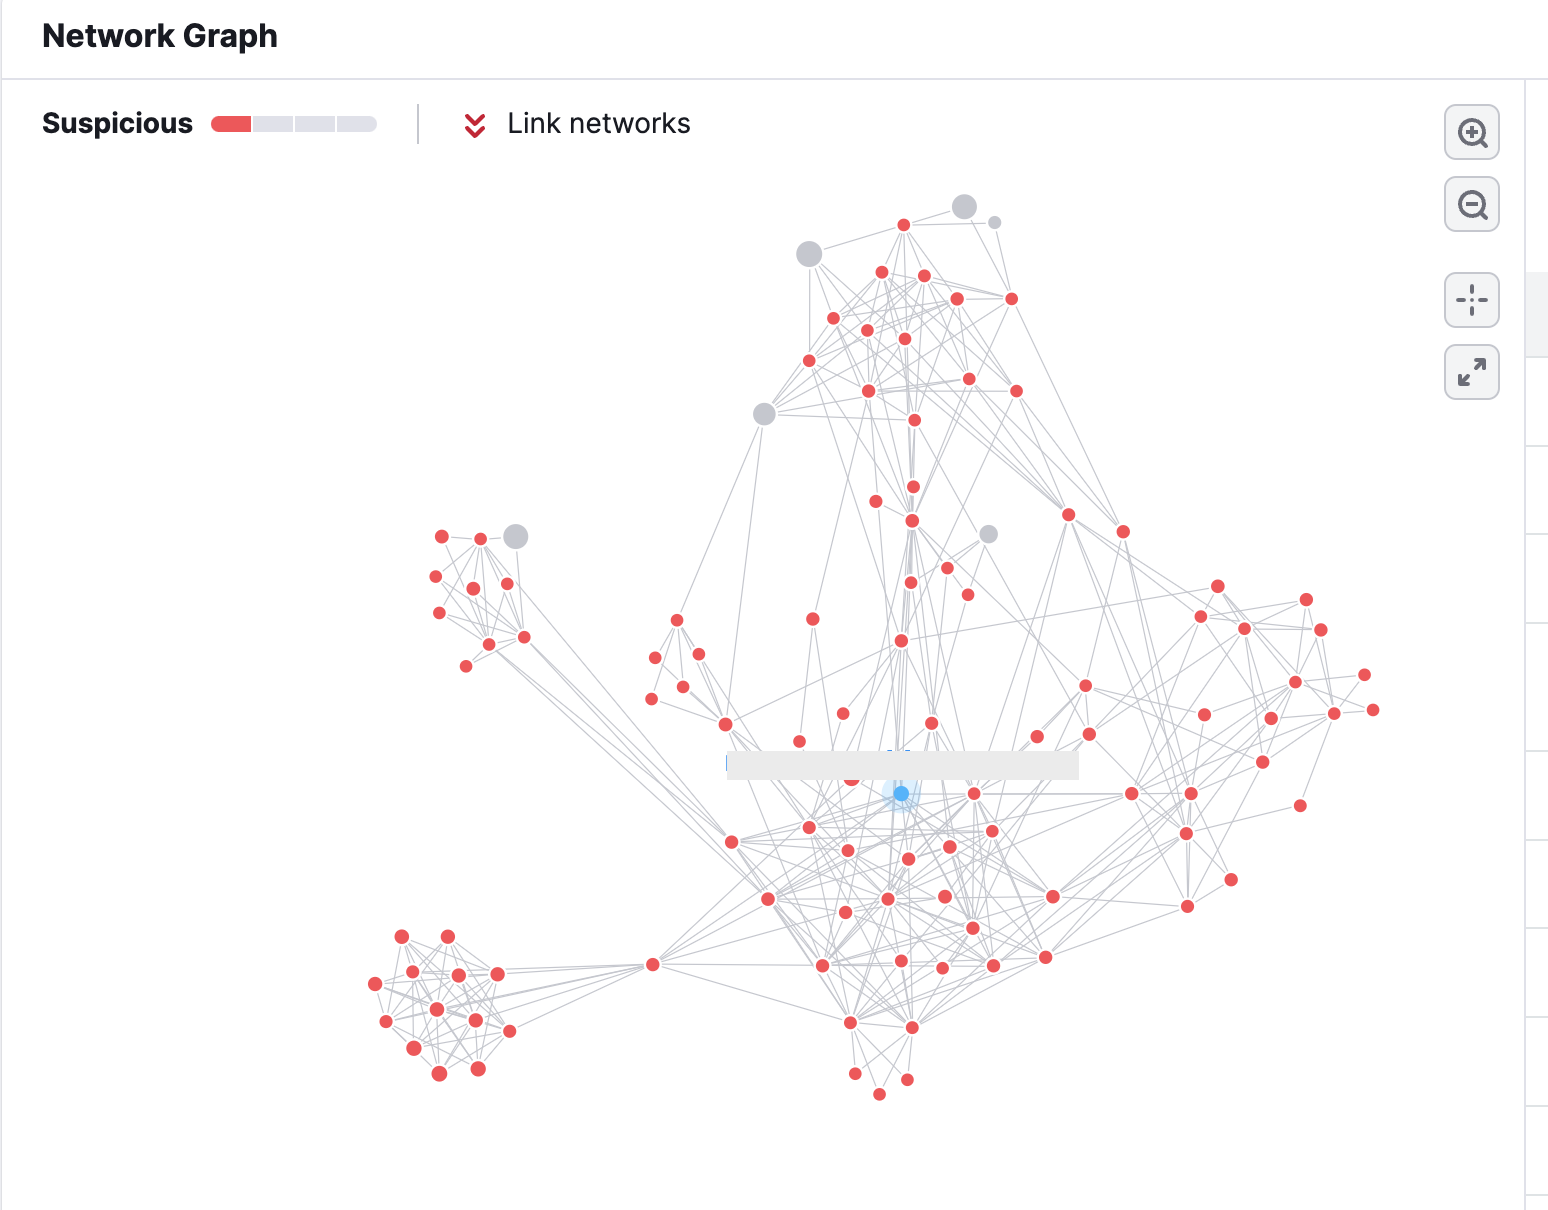 Example of a website being a part of a link farm. Network Graph report shows the scale of the link farm by using red dots connecting with each other.